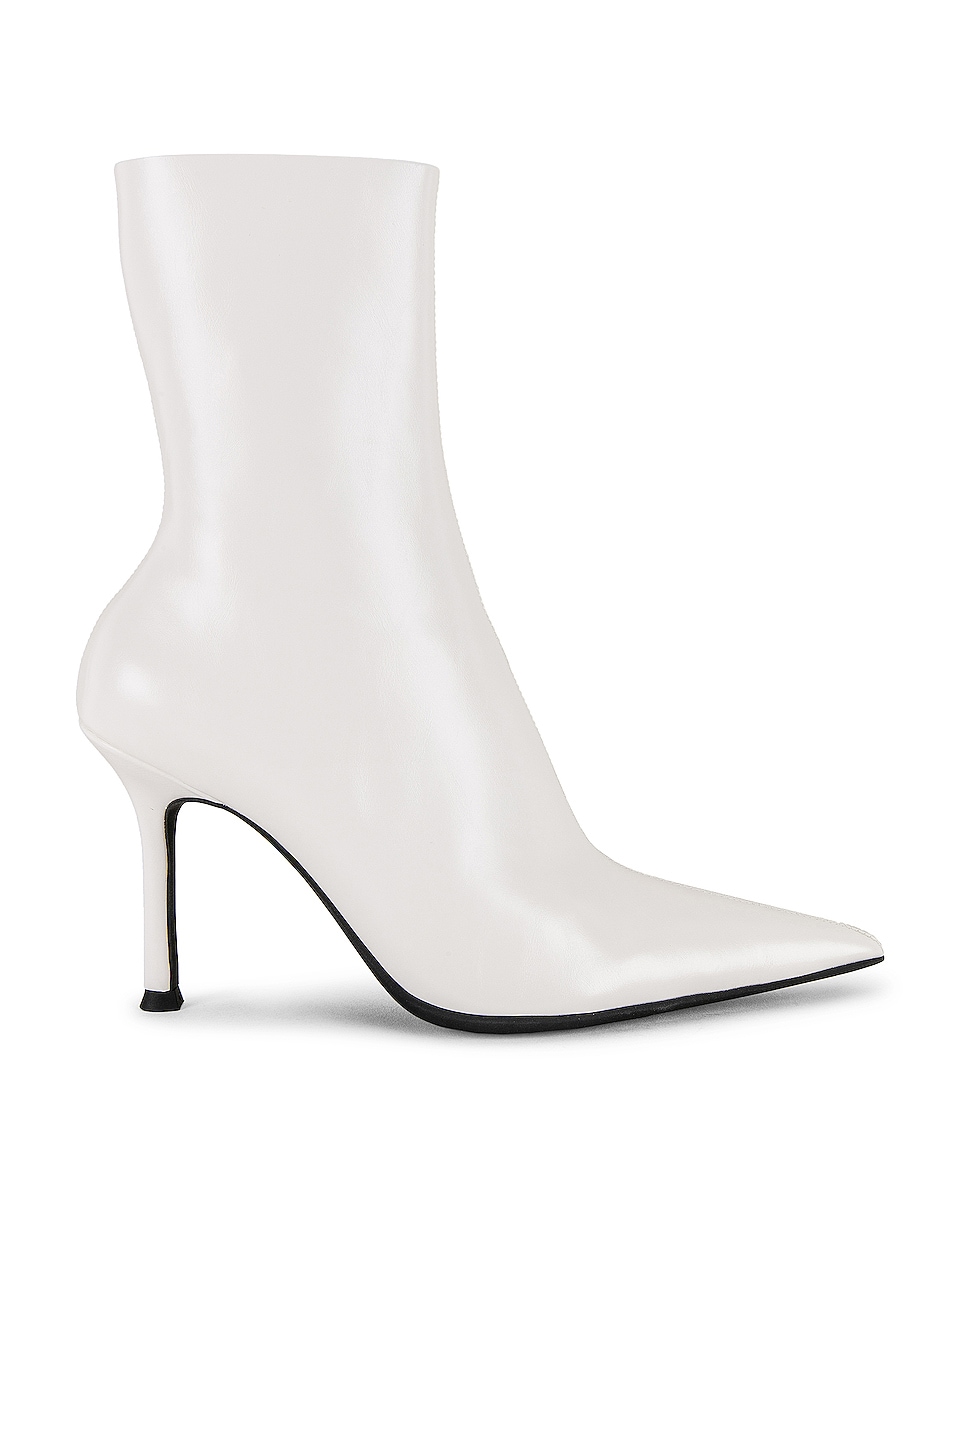 Jeffrey Campbell Daring Boot in White | REVOLVE